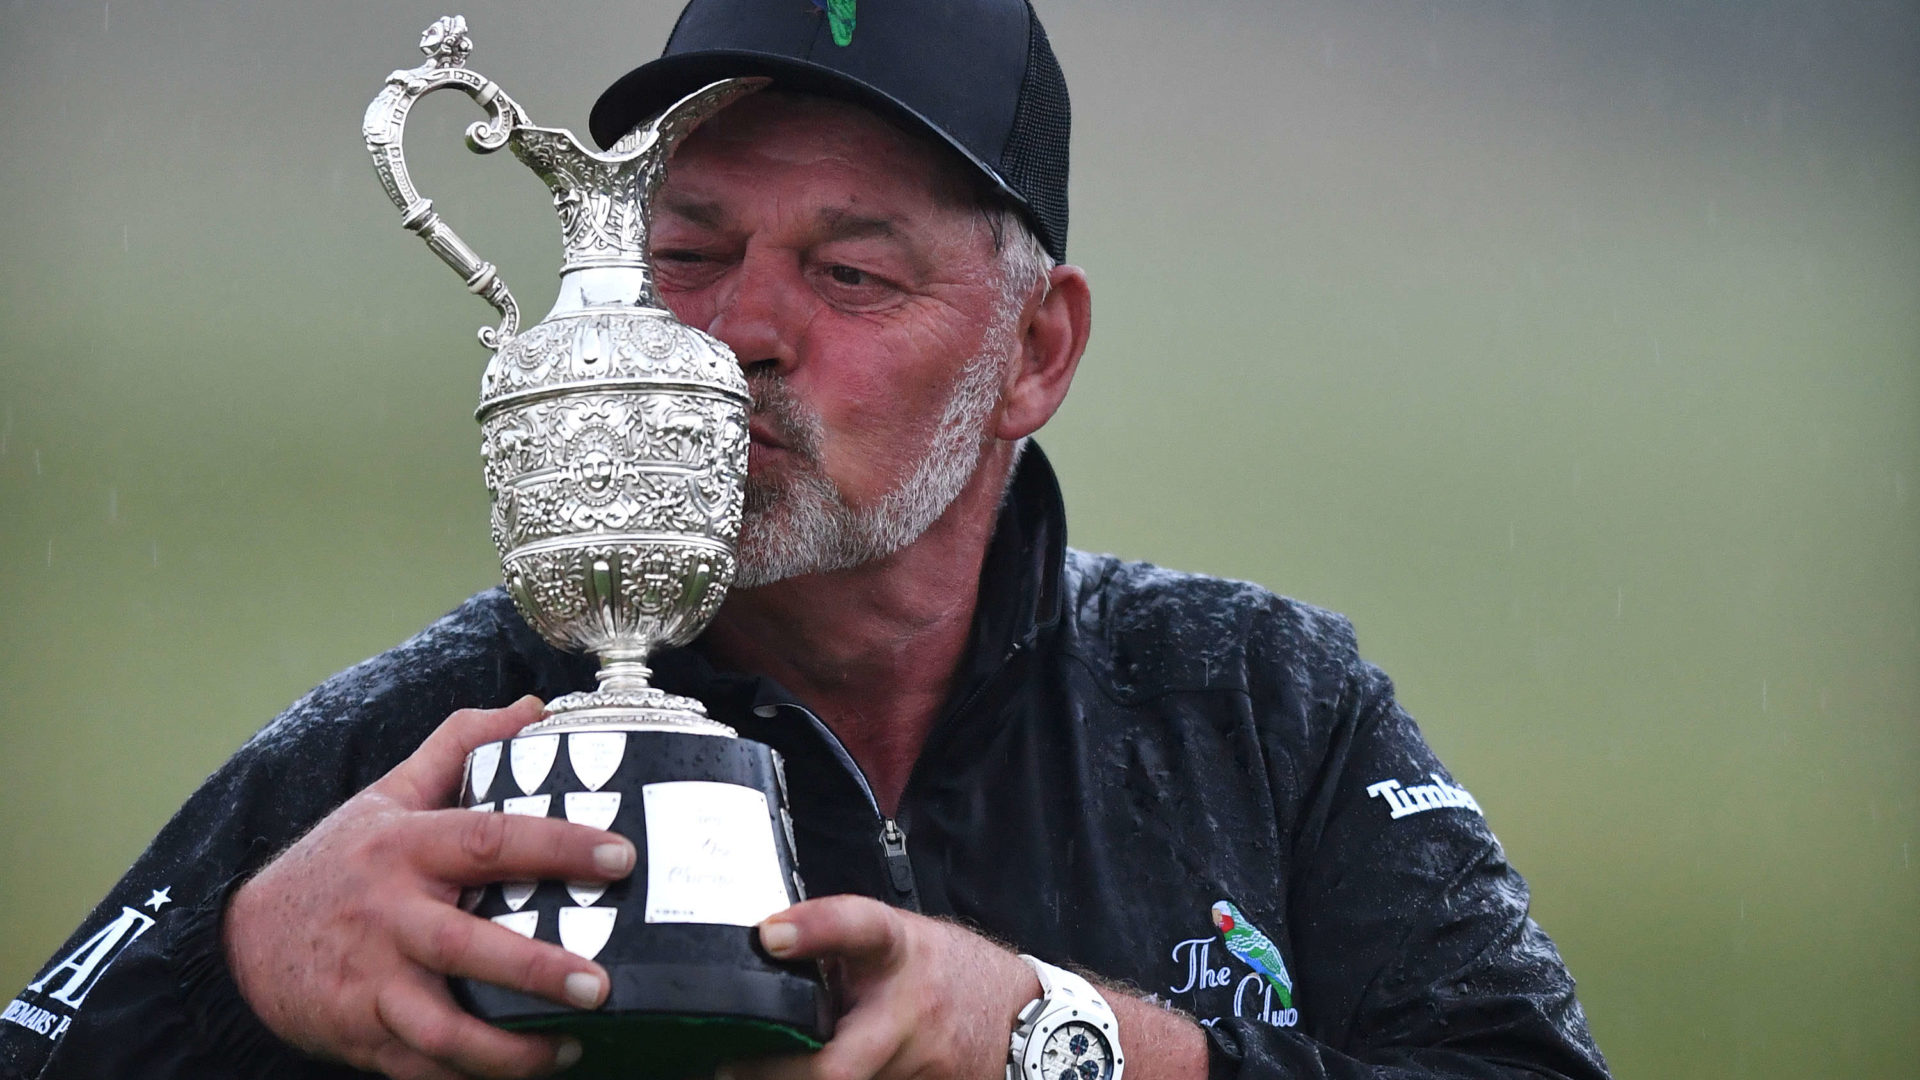 AUCHTERADER, SCOTLAND - JULY 24: Darren Clarke of Northern Ireland poses with the trophy as he wins the Senior Open Presented by Rolex at The King's Course at Gleneagles on July 24, 2022 in Auchterarder, United Kingdom. tour news (Photo by Mark Runnacles/Getty Images)